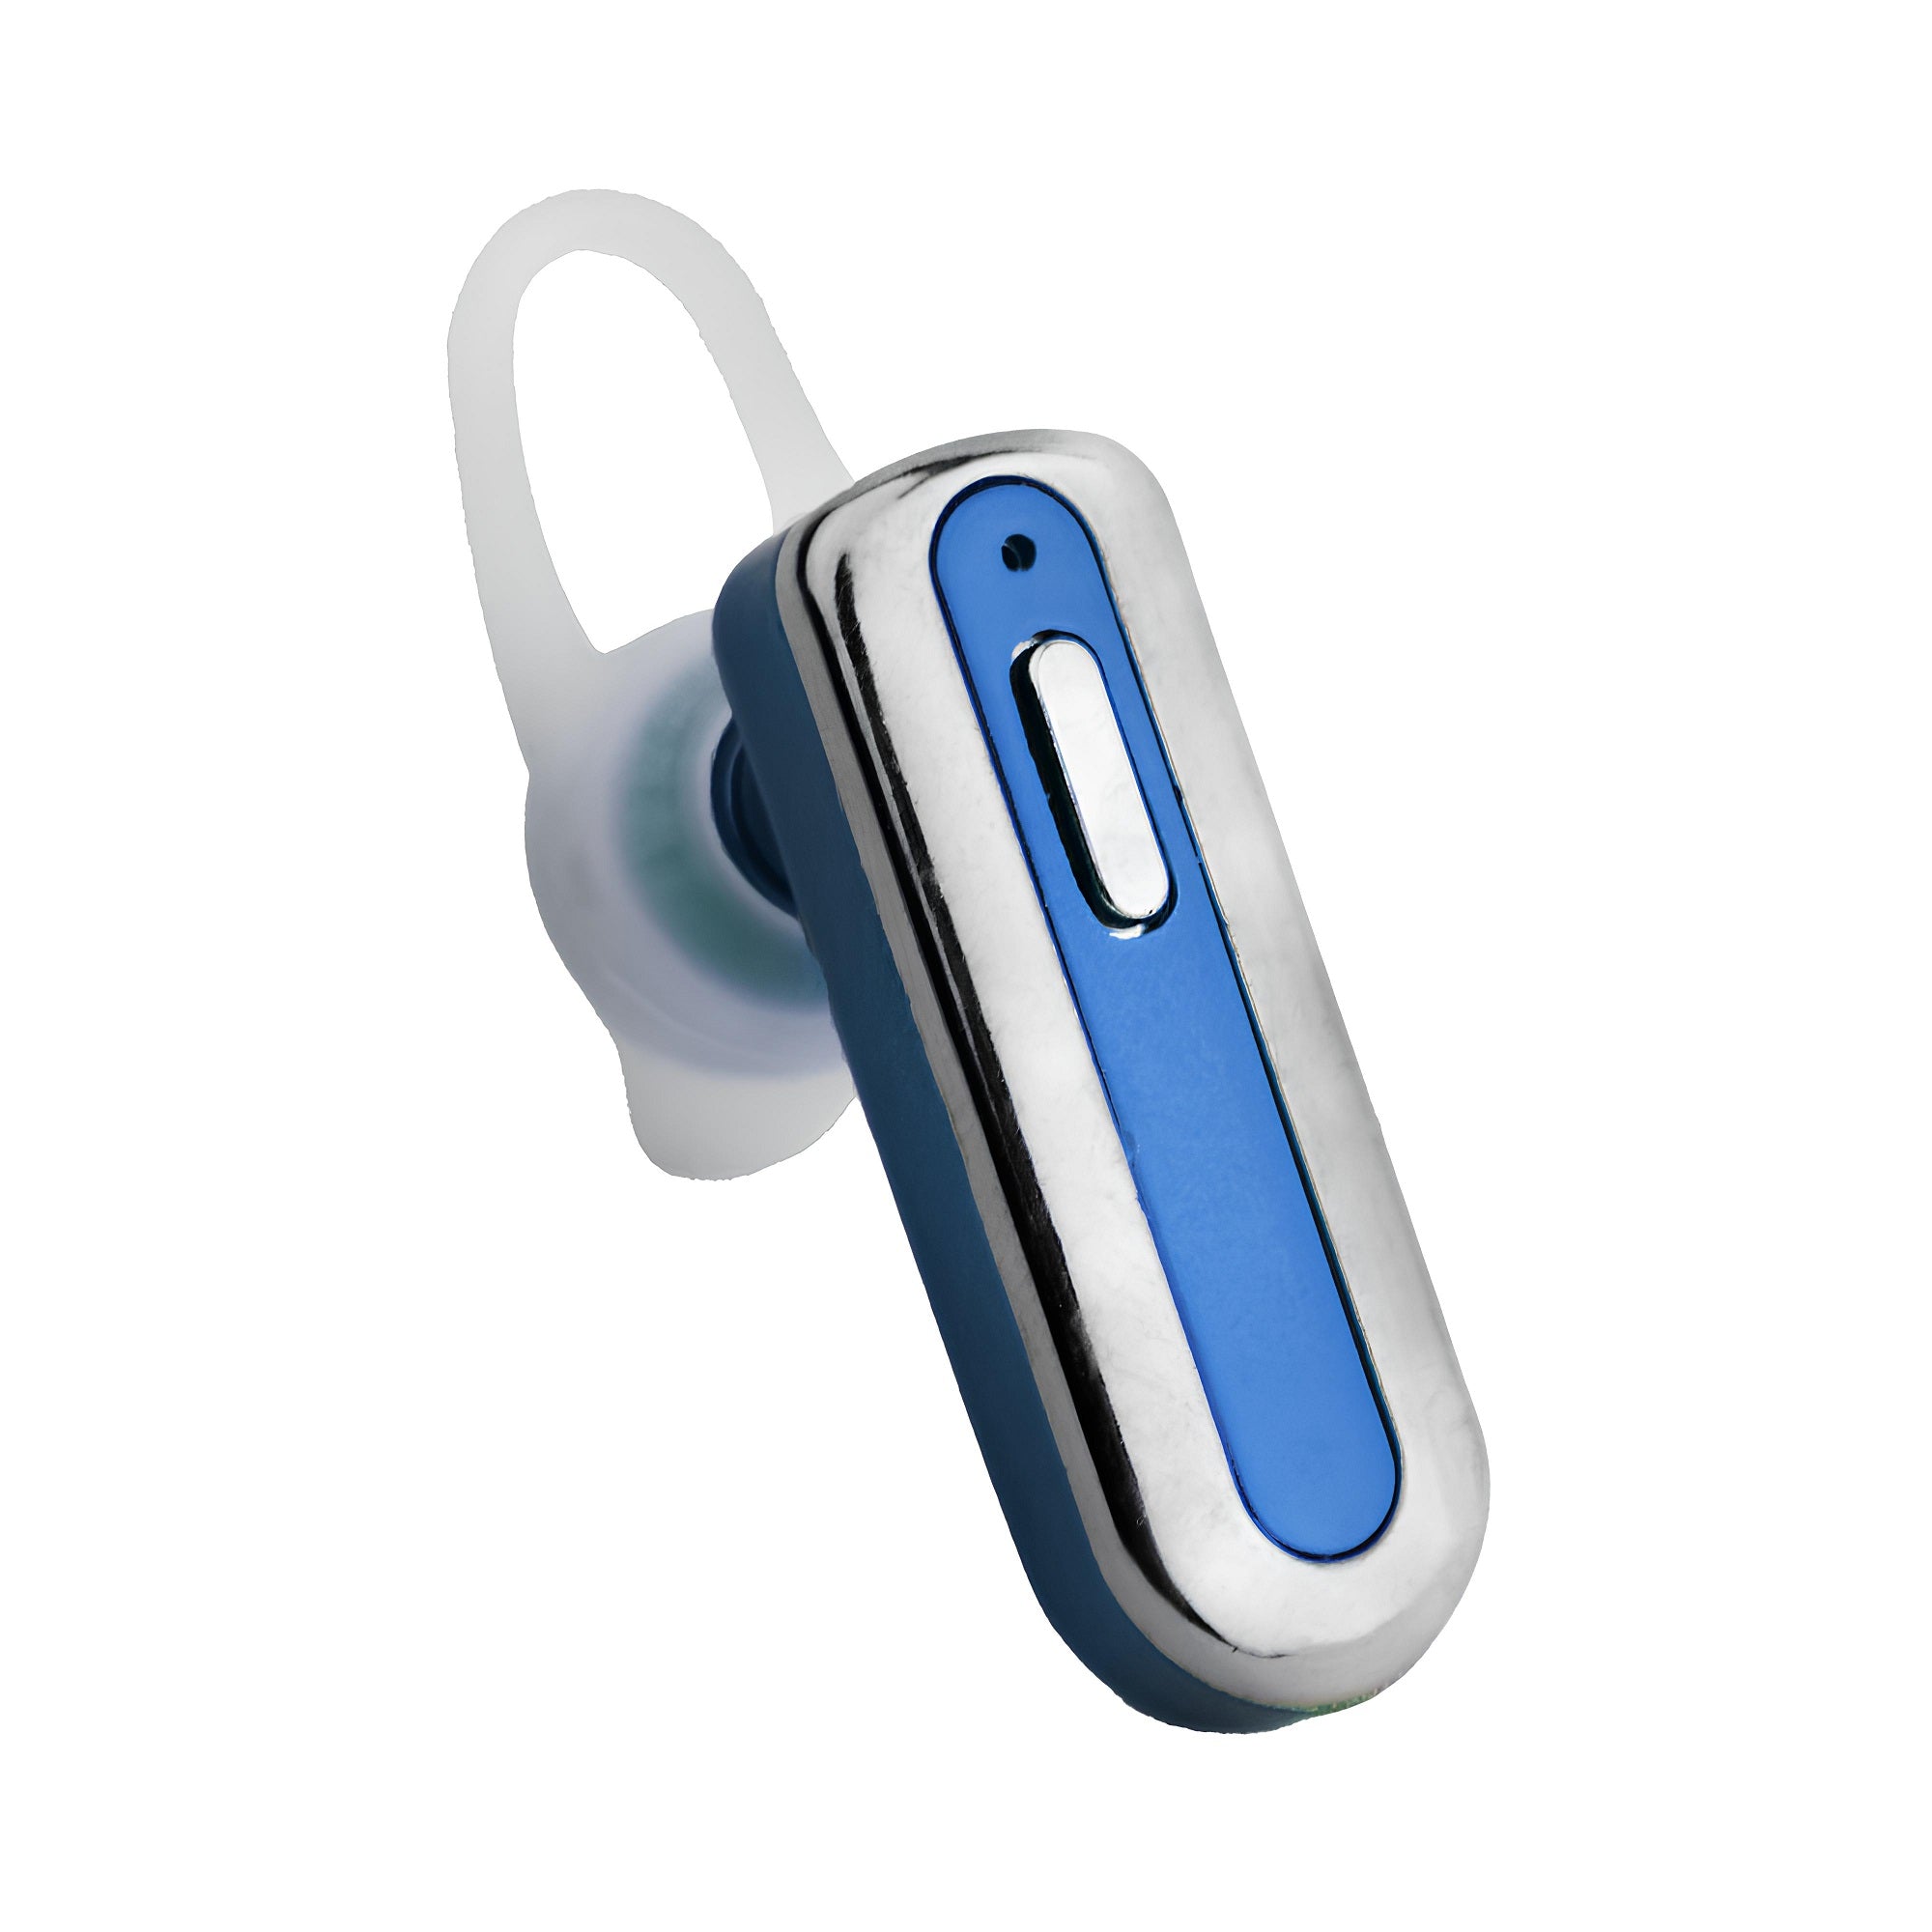 M11 Bluetooth Wireless Headset Right Ear Single Earbuds For phone